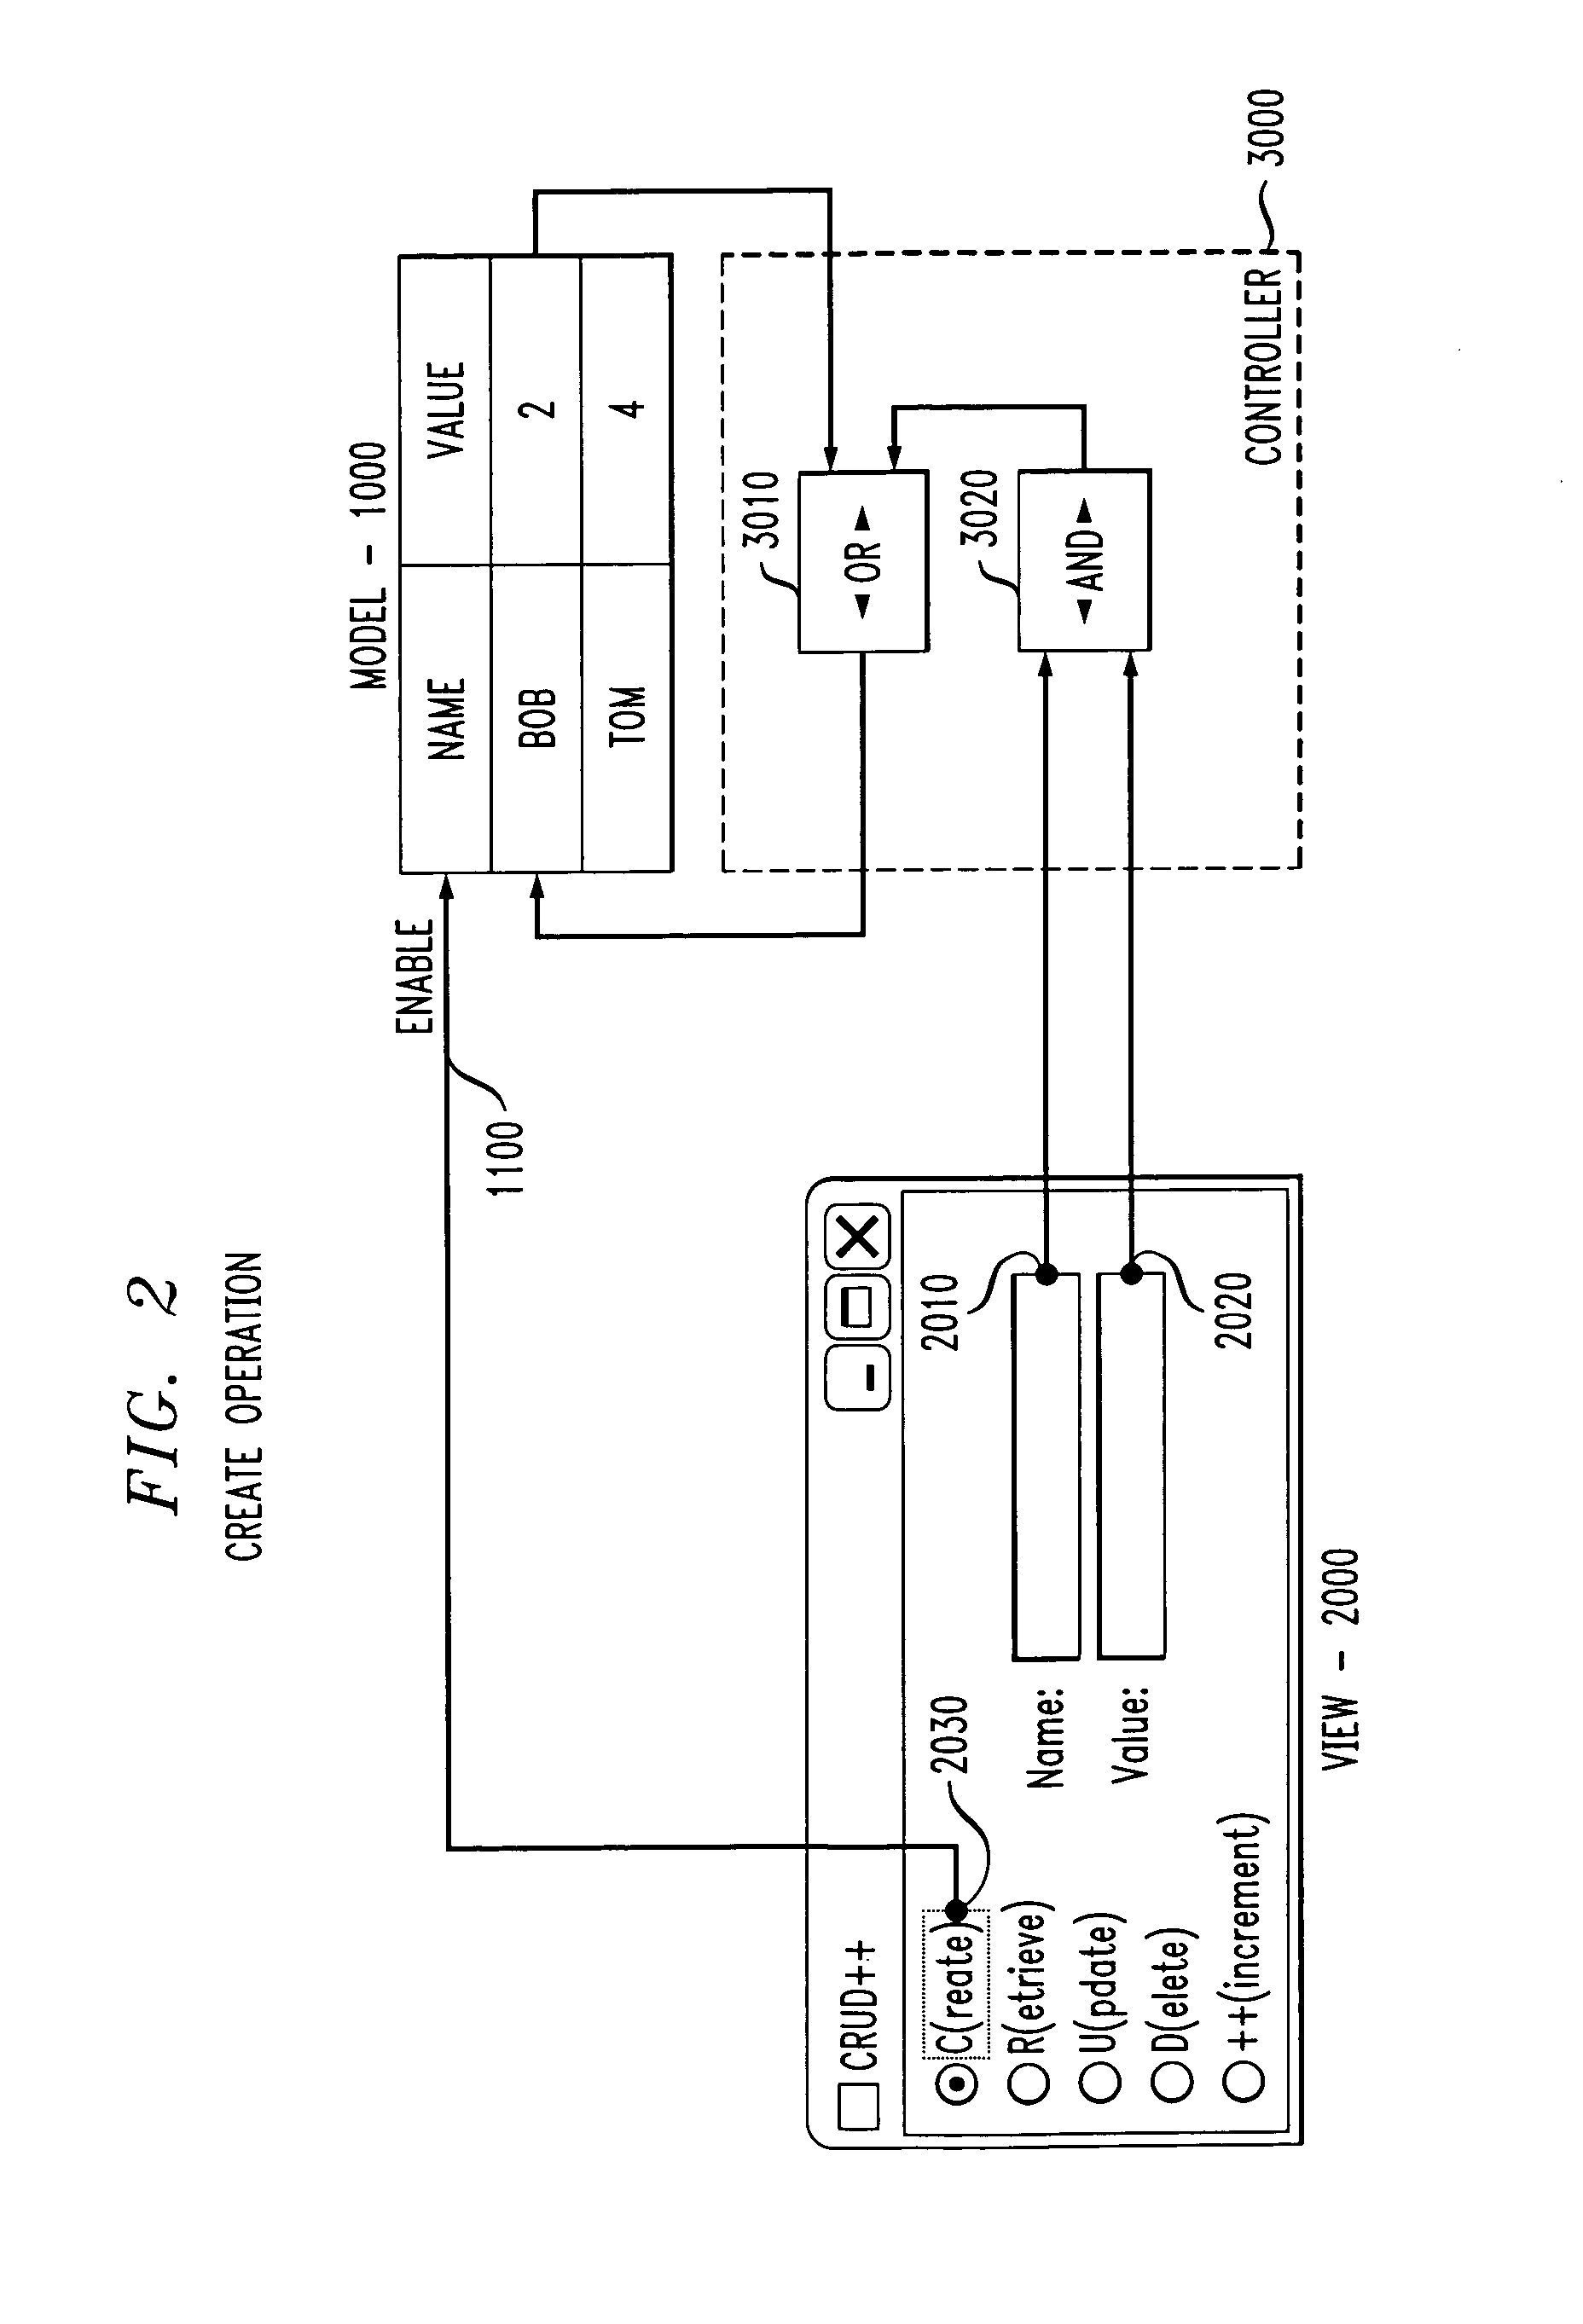 Methods and apparatus for constructing declarative componentized applications